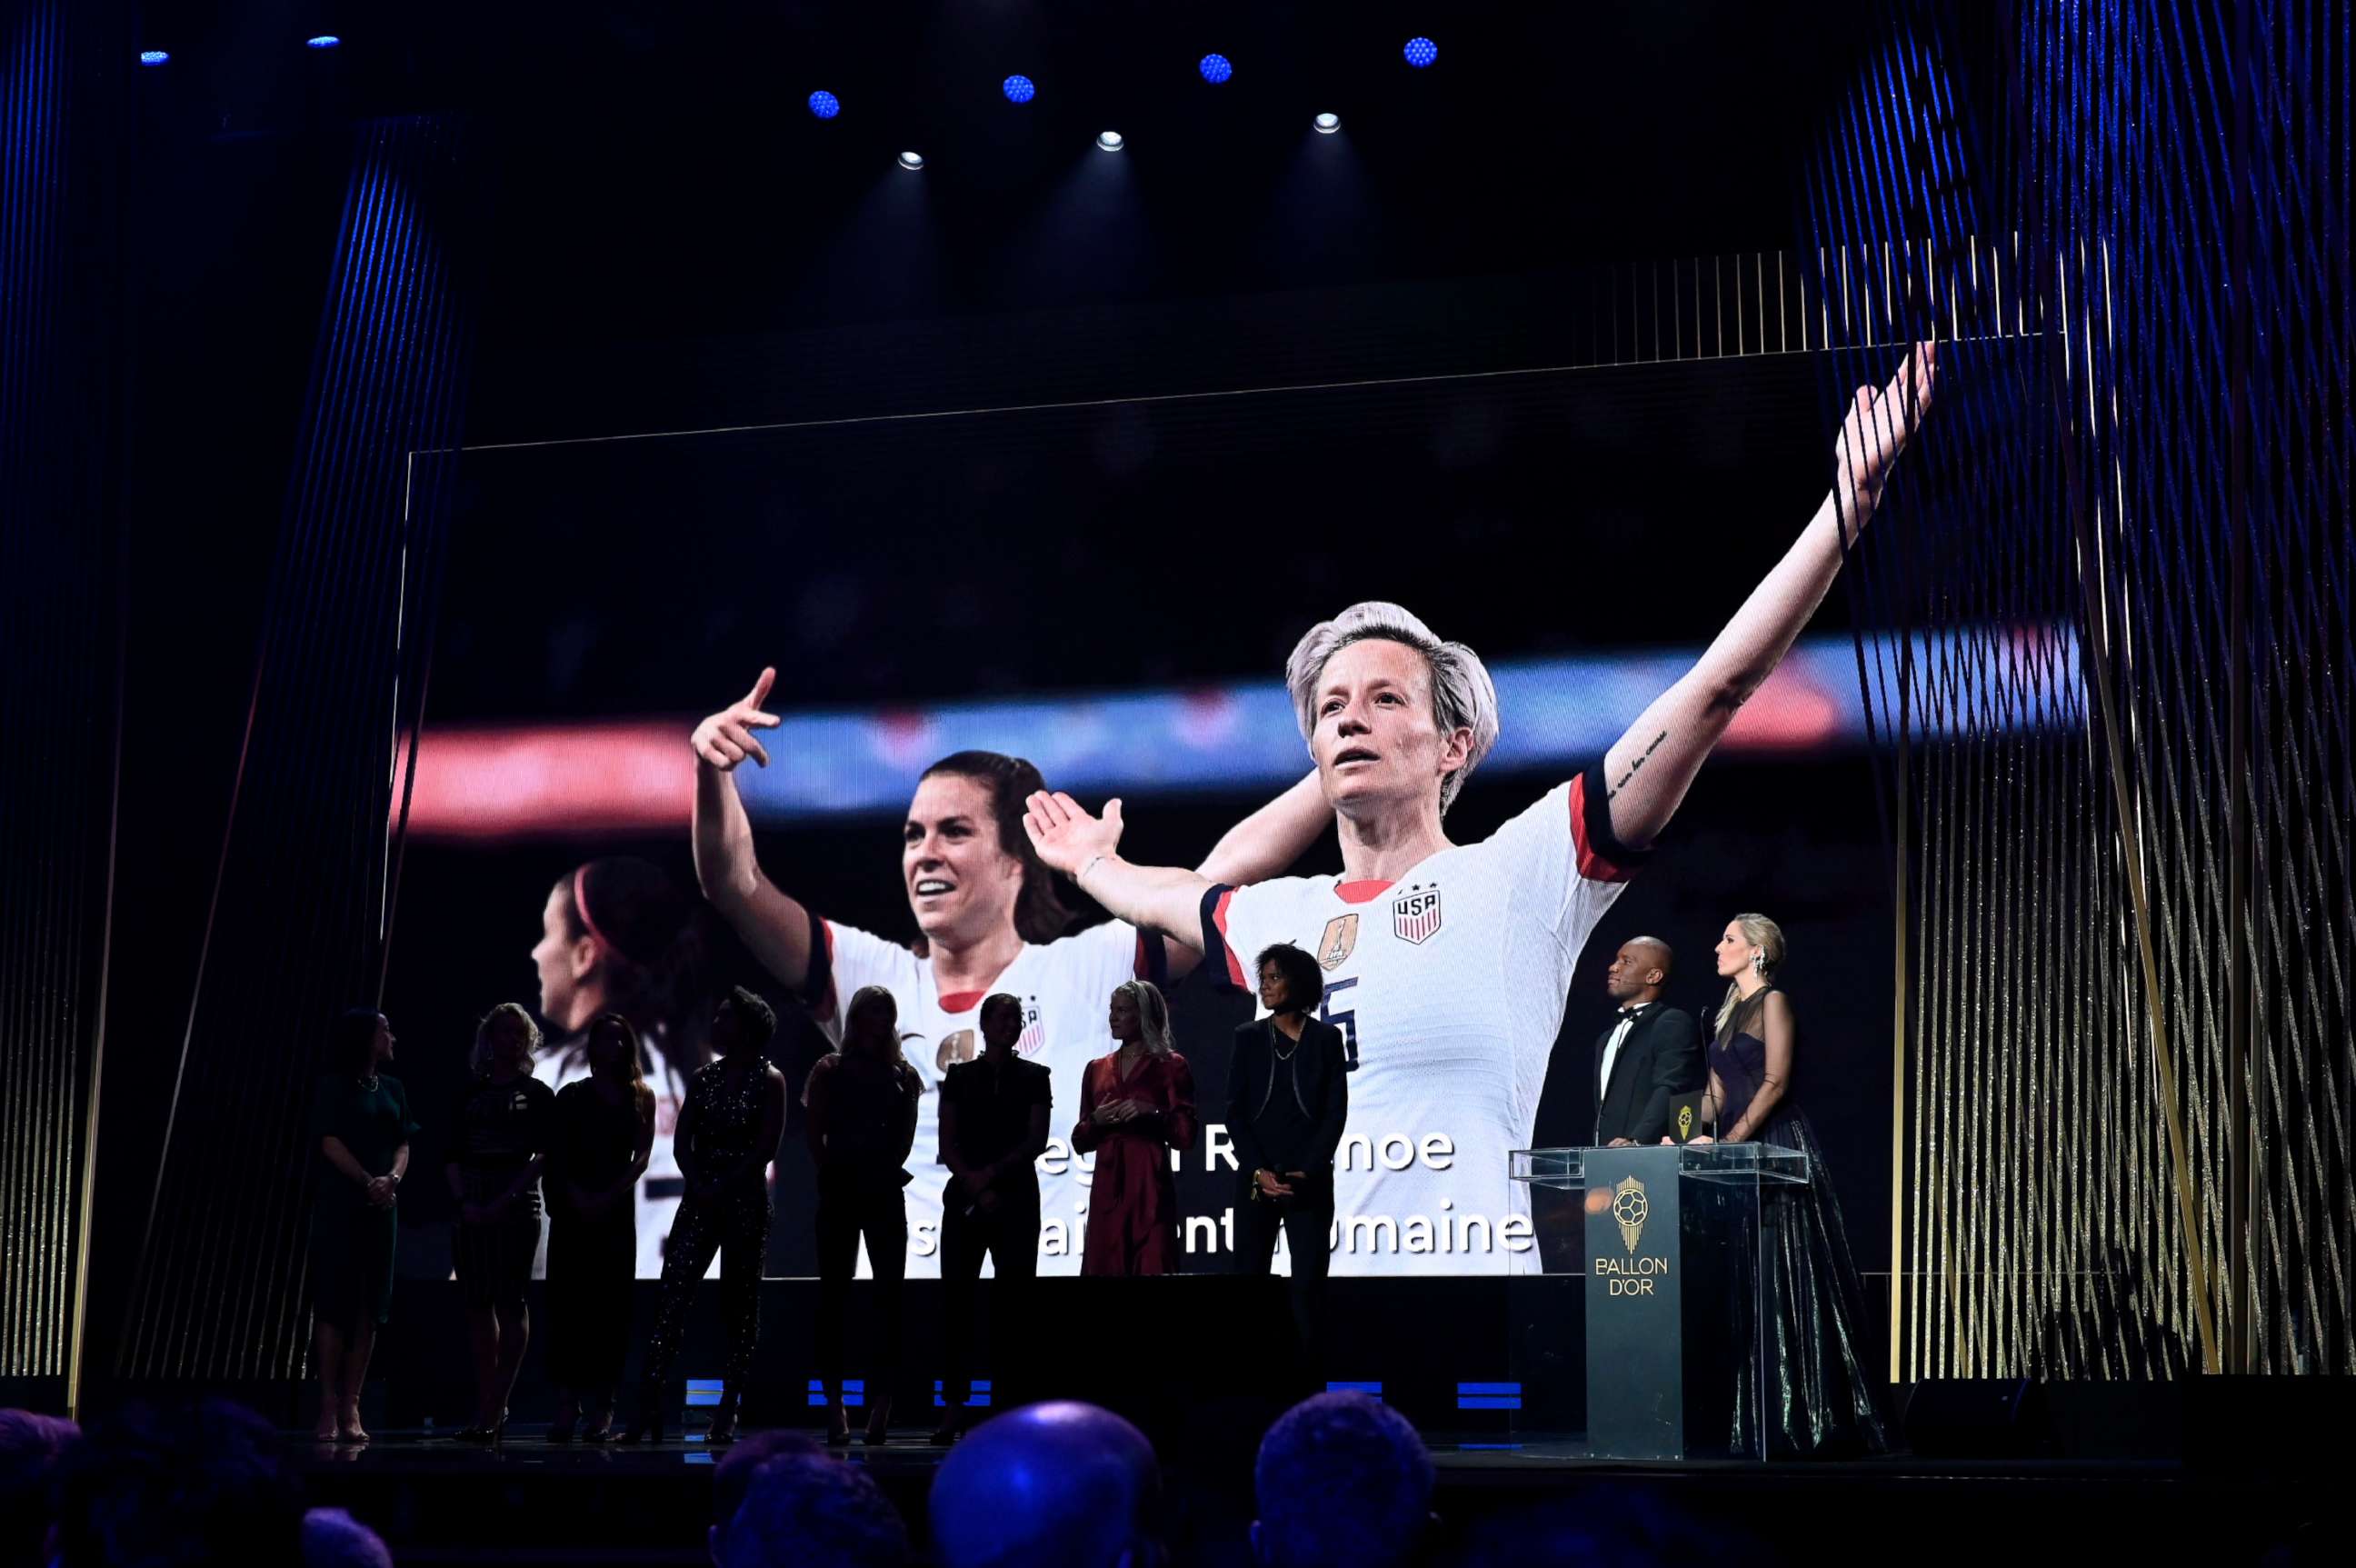 PHOTO: Megan Rapinoe, who was unable to except her award in person, wins the Ballon D'Or award during the Ballon D'Or Ceremony at Theatre Du Chatelet on Dec. 2, 2019 in Paris. The 2019 female nominees pose onstage in her absence.